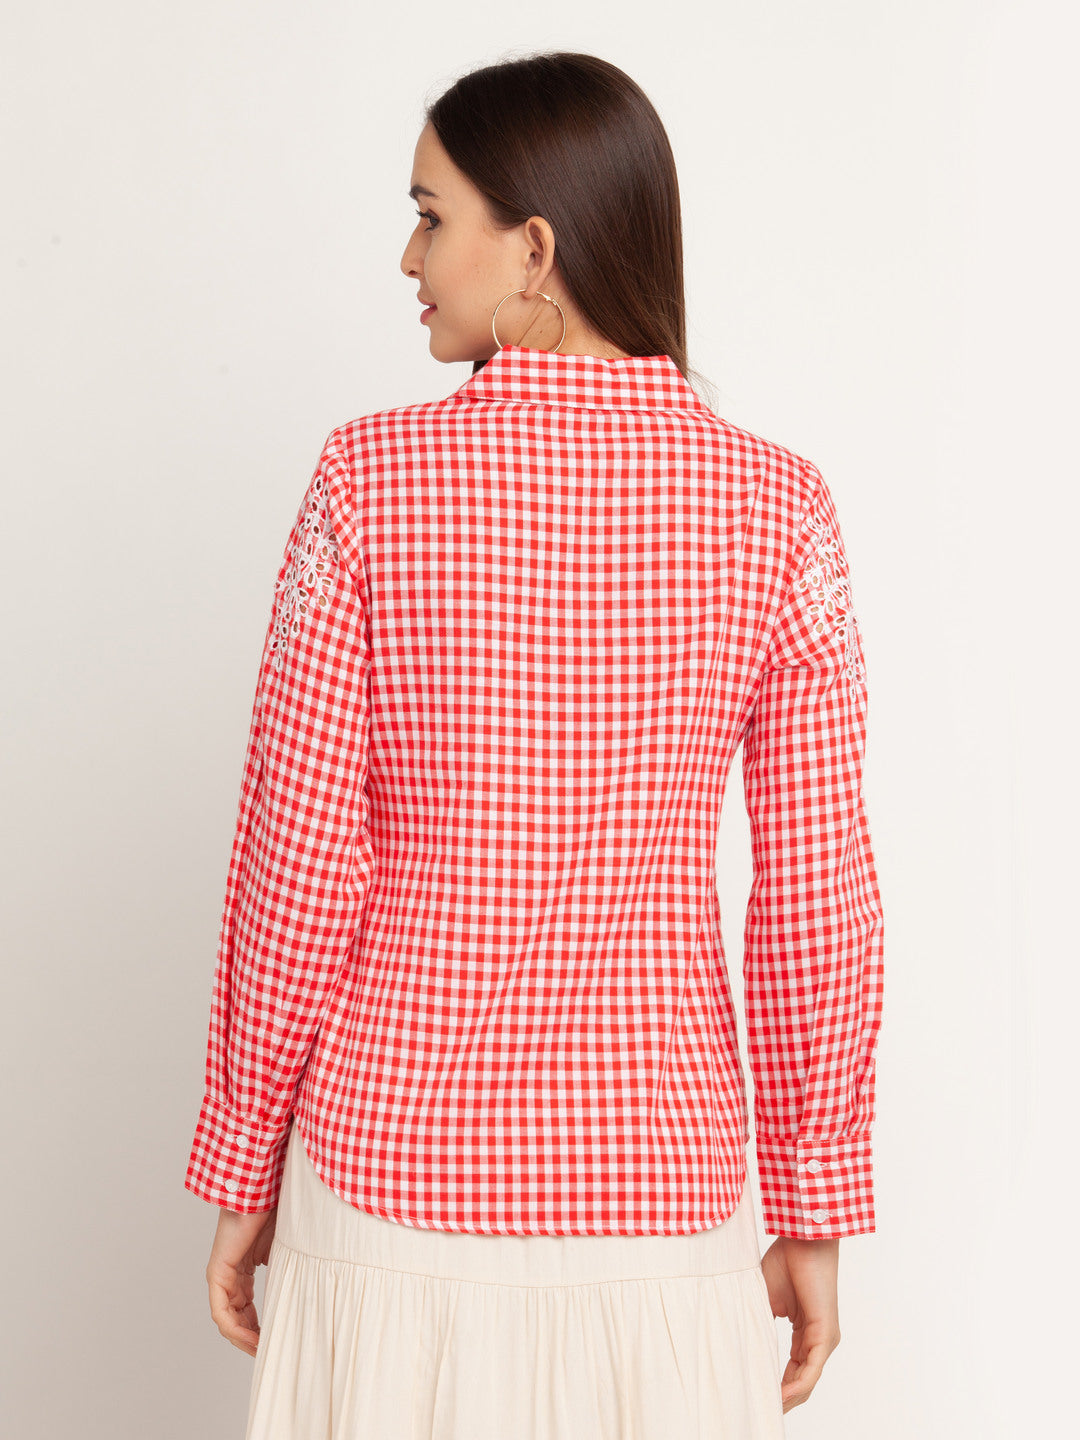 Red Striped Long Sleeves Top For Women